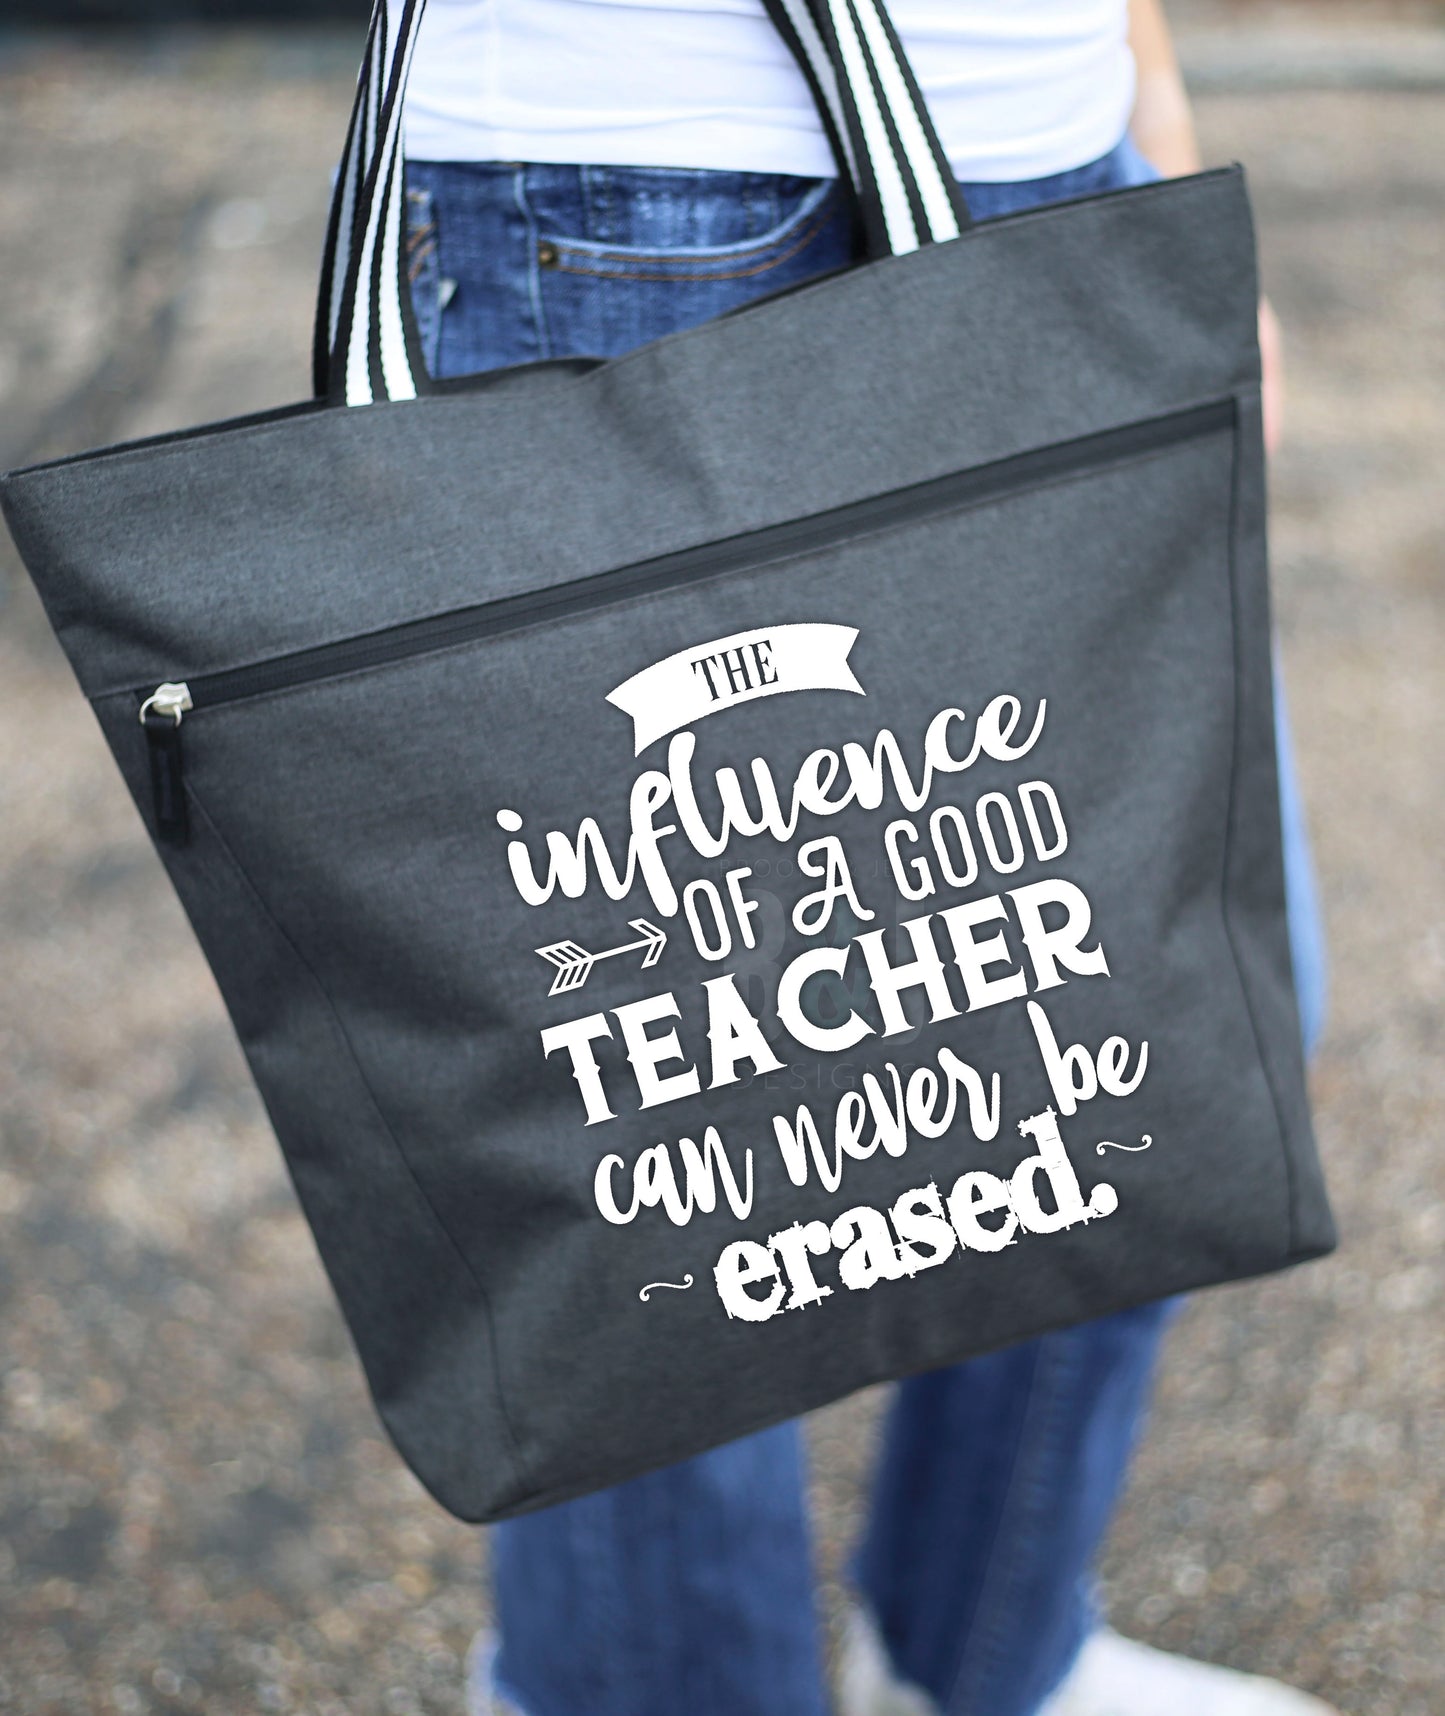 Influence of a Teacher Can Never Be Erased Lexie Black Tote Bag for Teachers